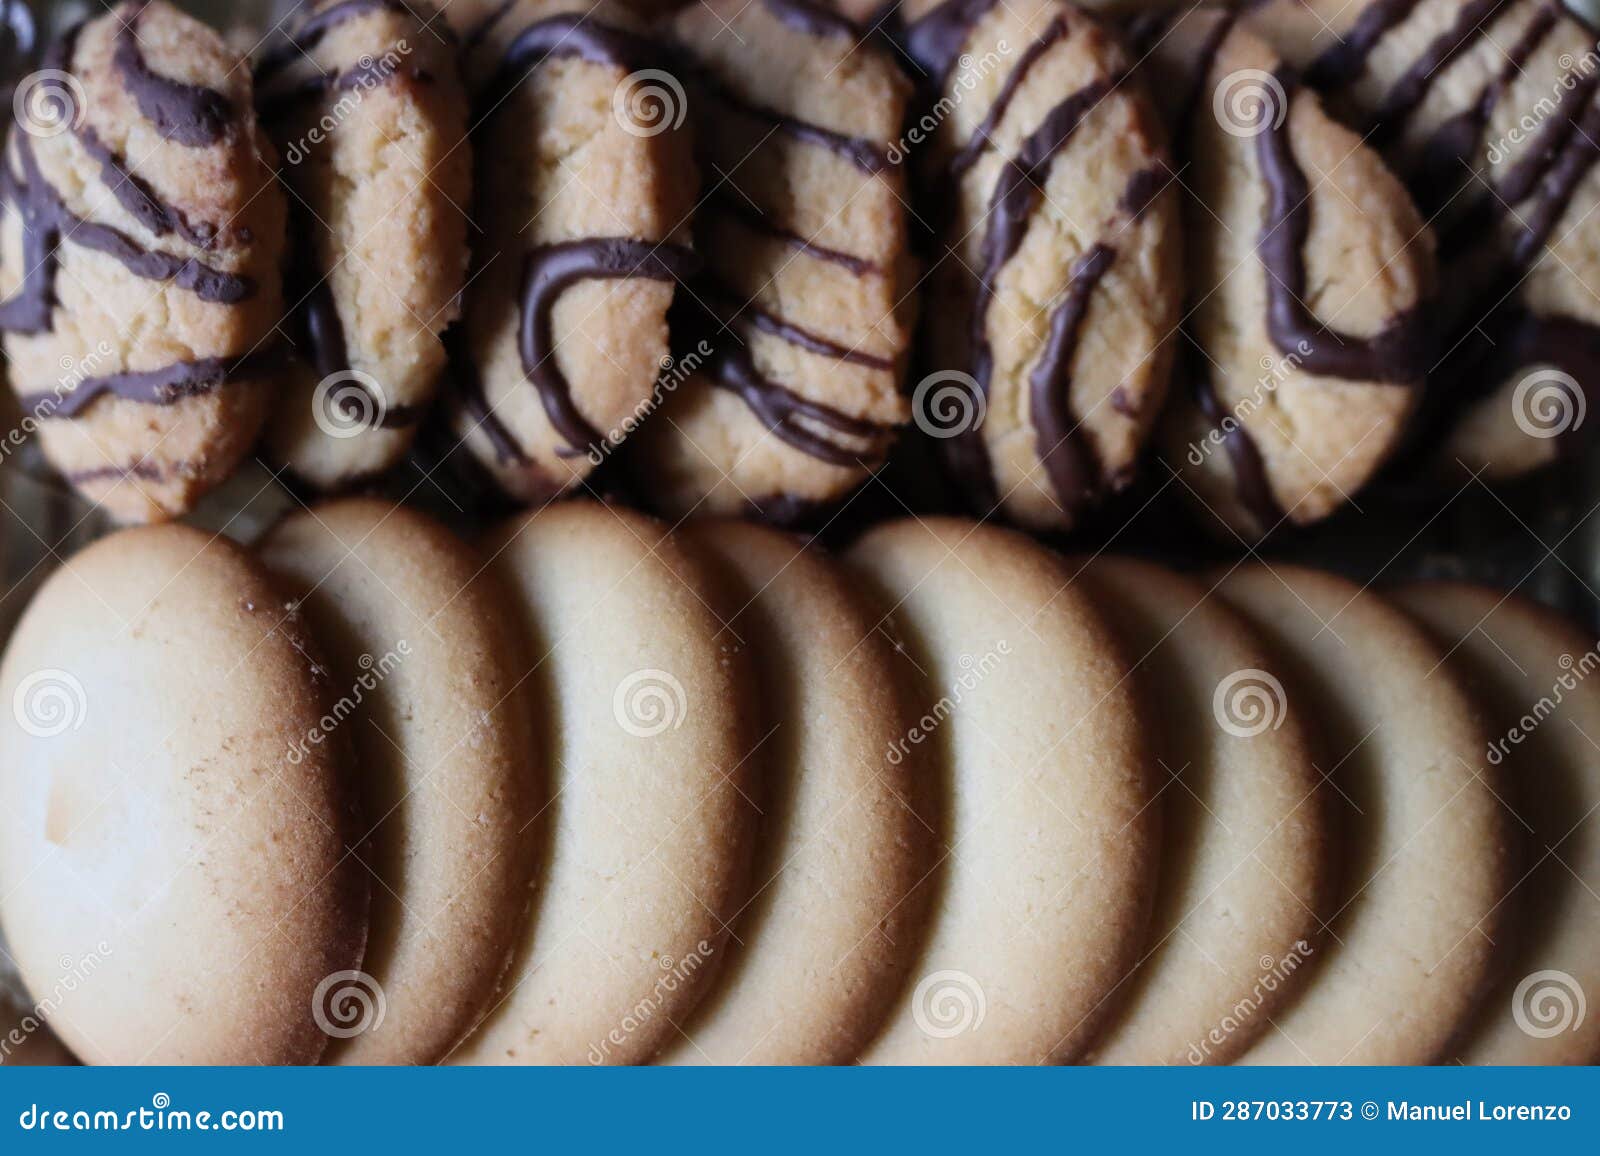 delicious biscuits with an amazing look and an exquisite taste pleasant smell